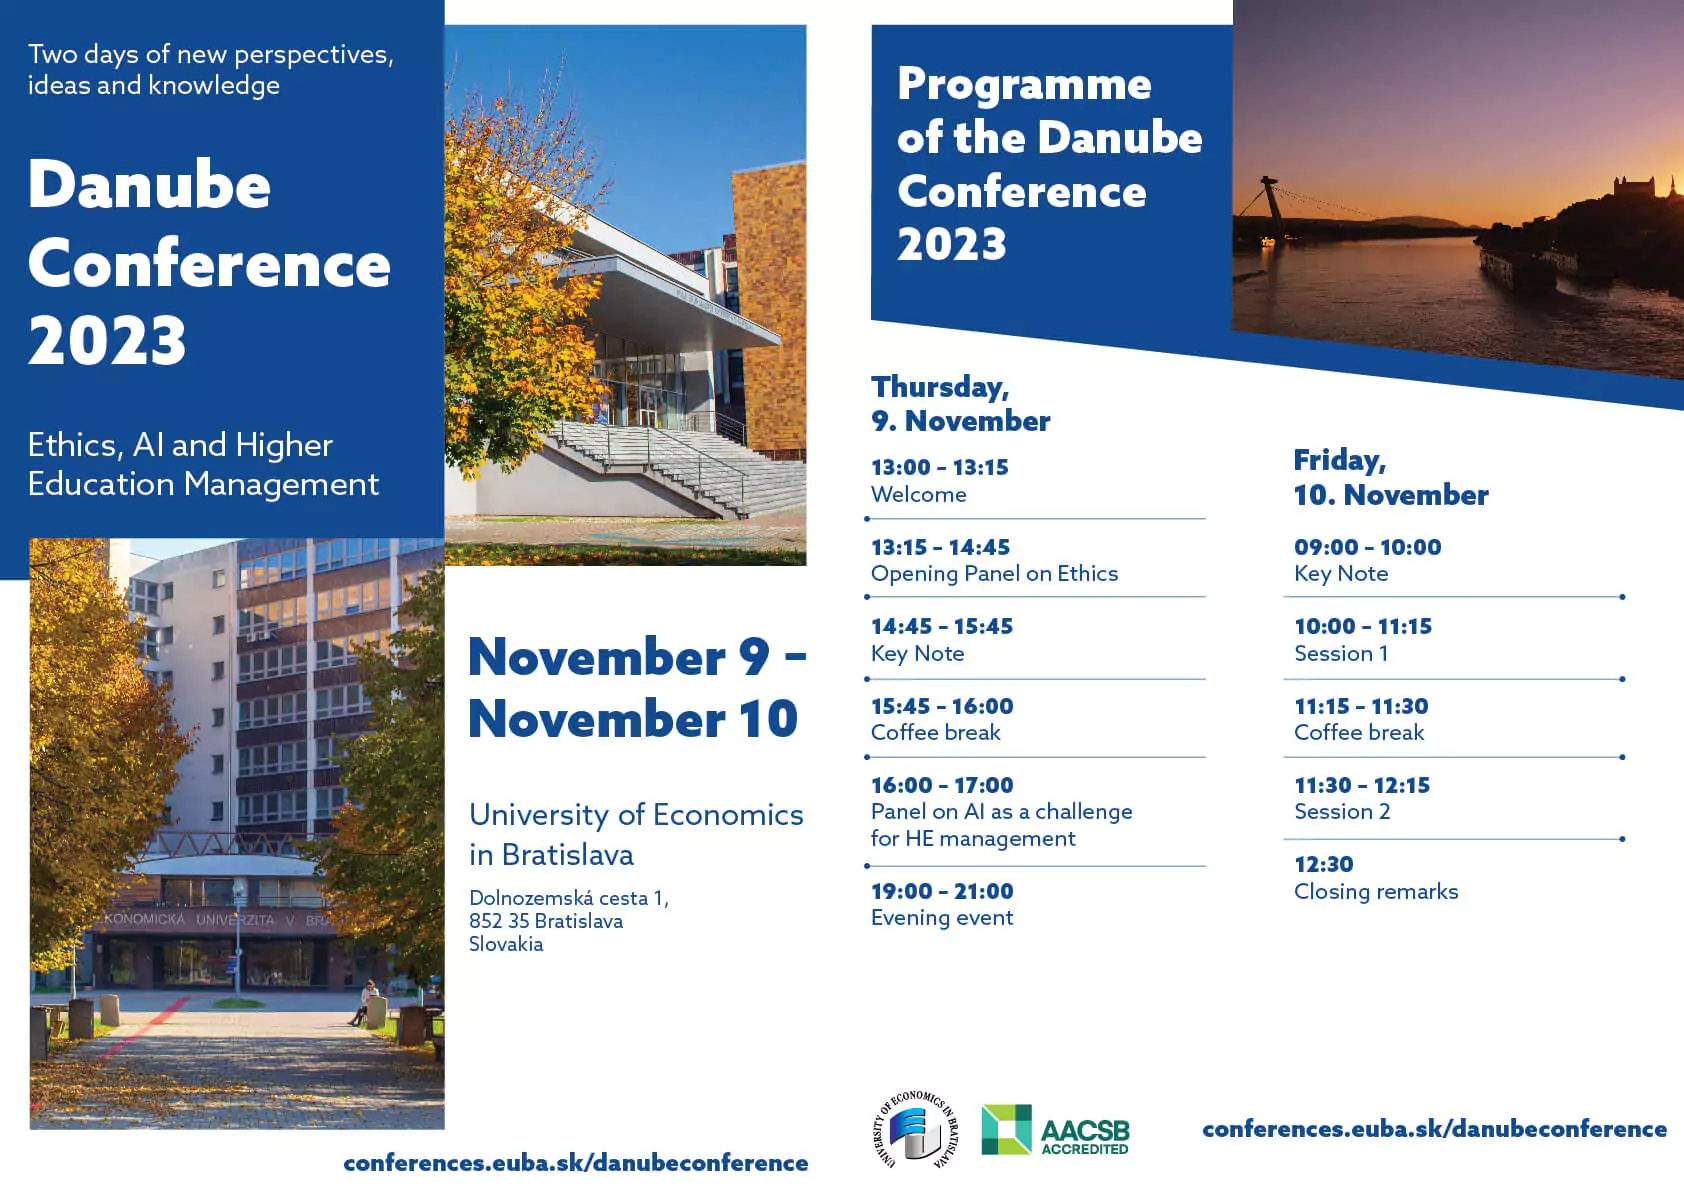 Programme of the Danube Conference 2023